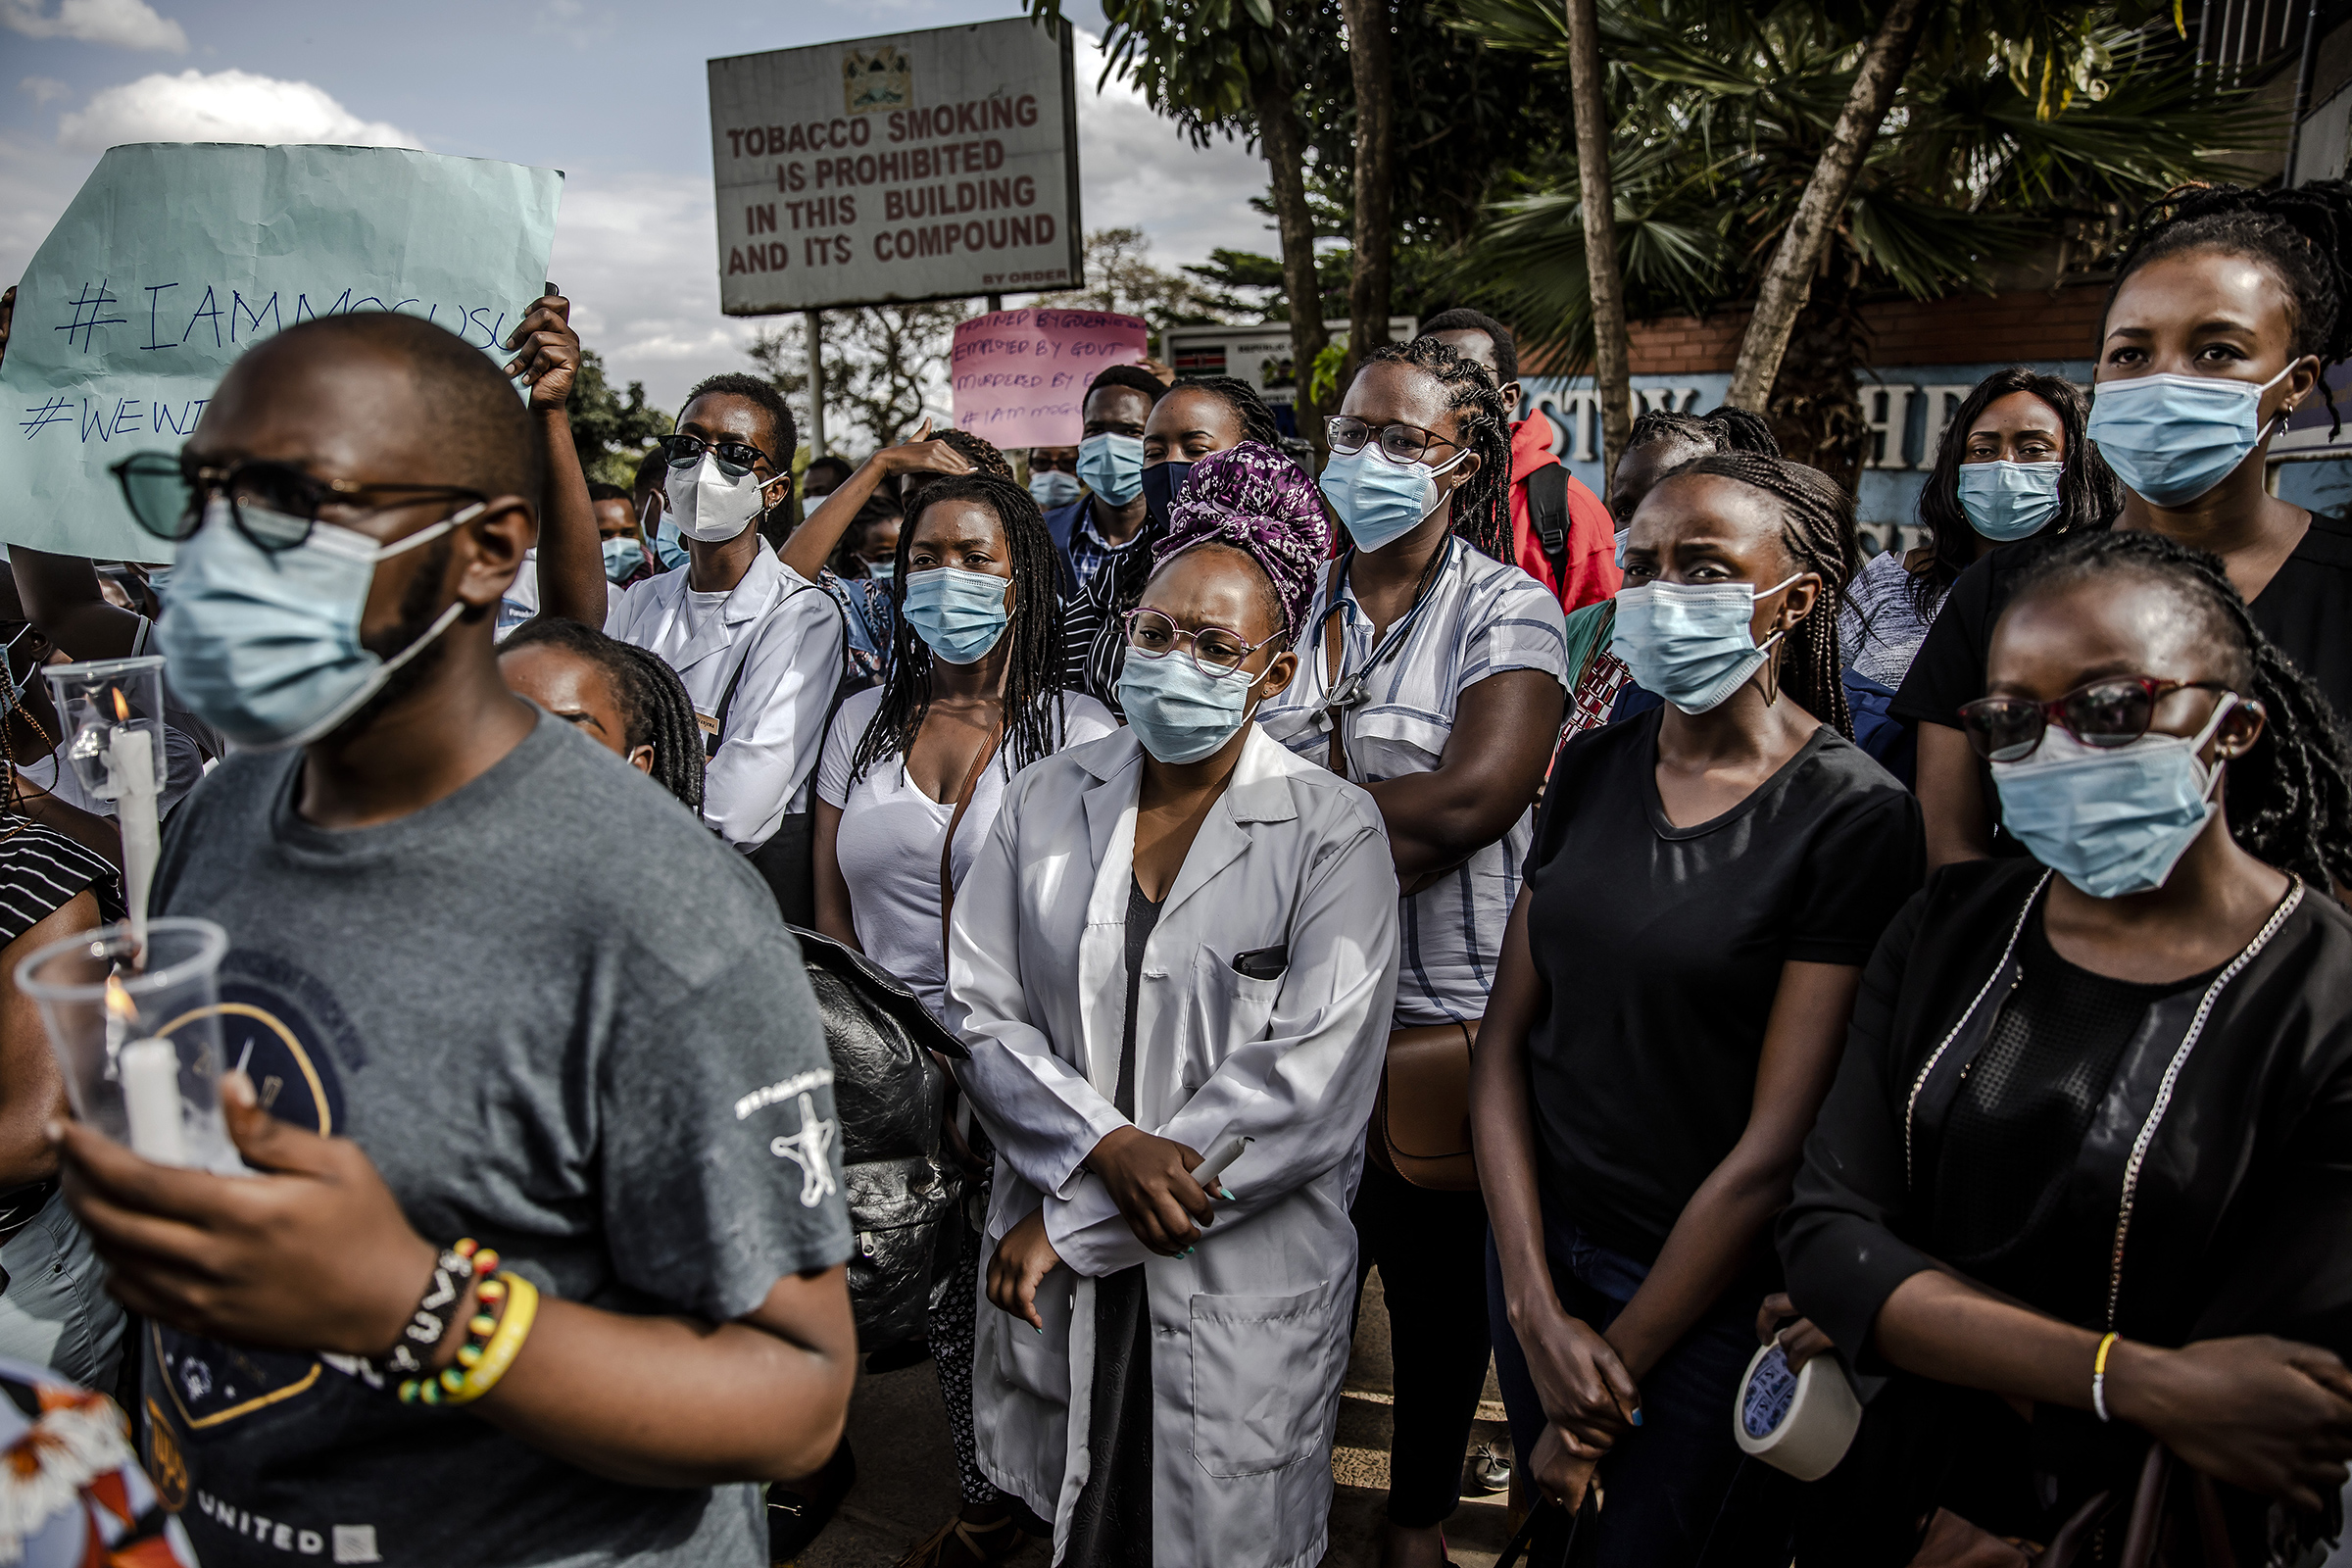 Demonstrators gather during a protest by health care workers, including nurses and clinical officers, against poor working conditions outside the Ministry of Health in Nairobi on Dec. 9, 2020. (Luis Tato—Bloomberg/Getty Images)